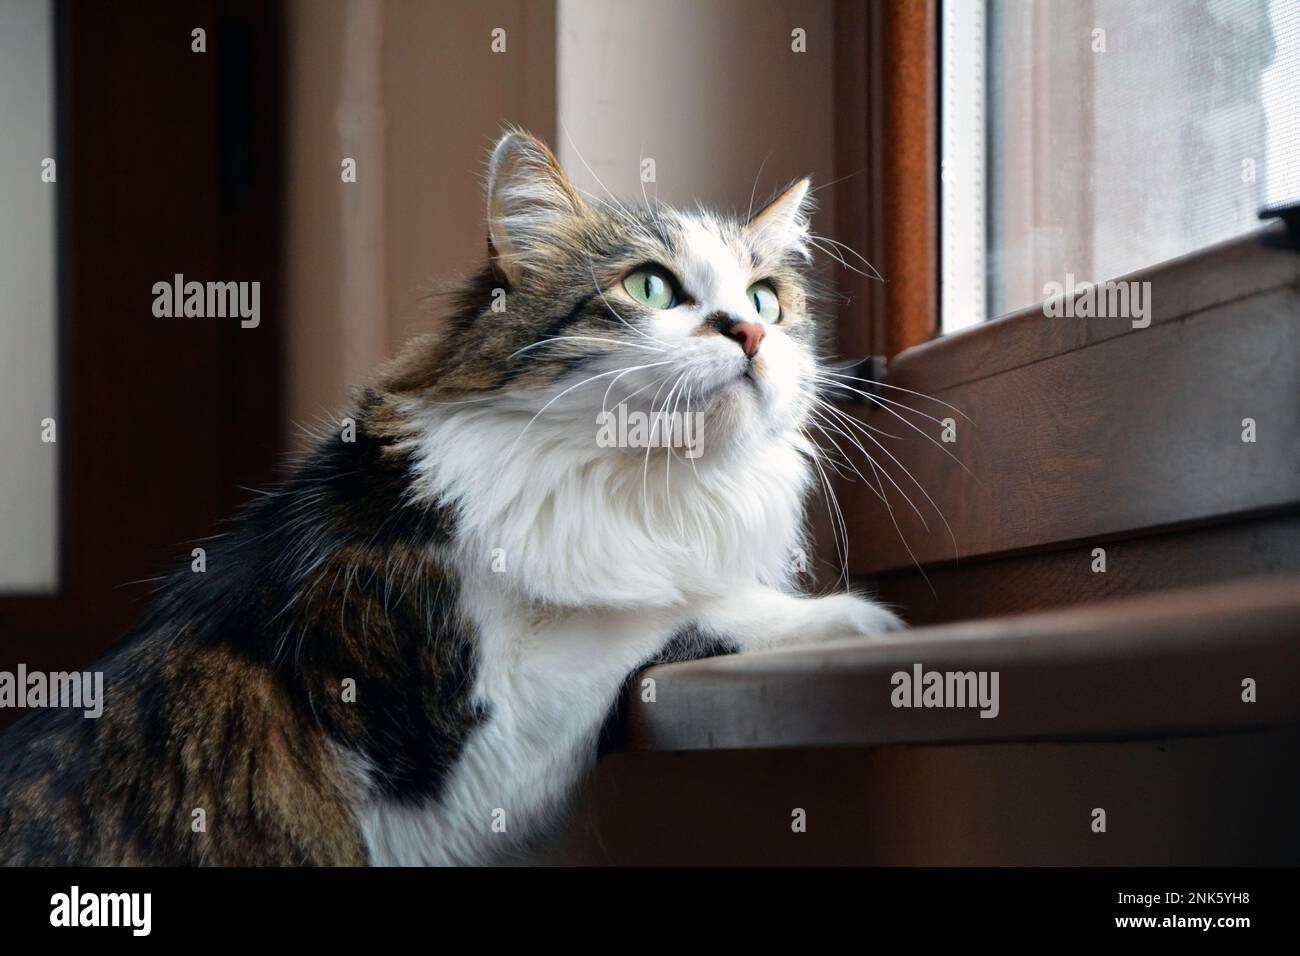 Closeup of a cute tabby domestic cat with long fur and green eyes sitting next to a window and staring at something outside Stock Photo